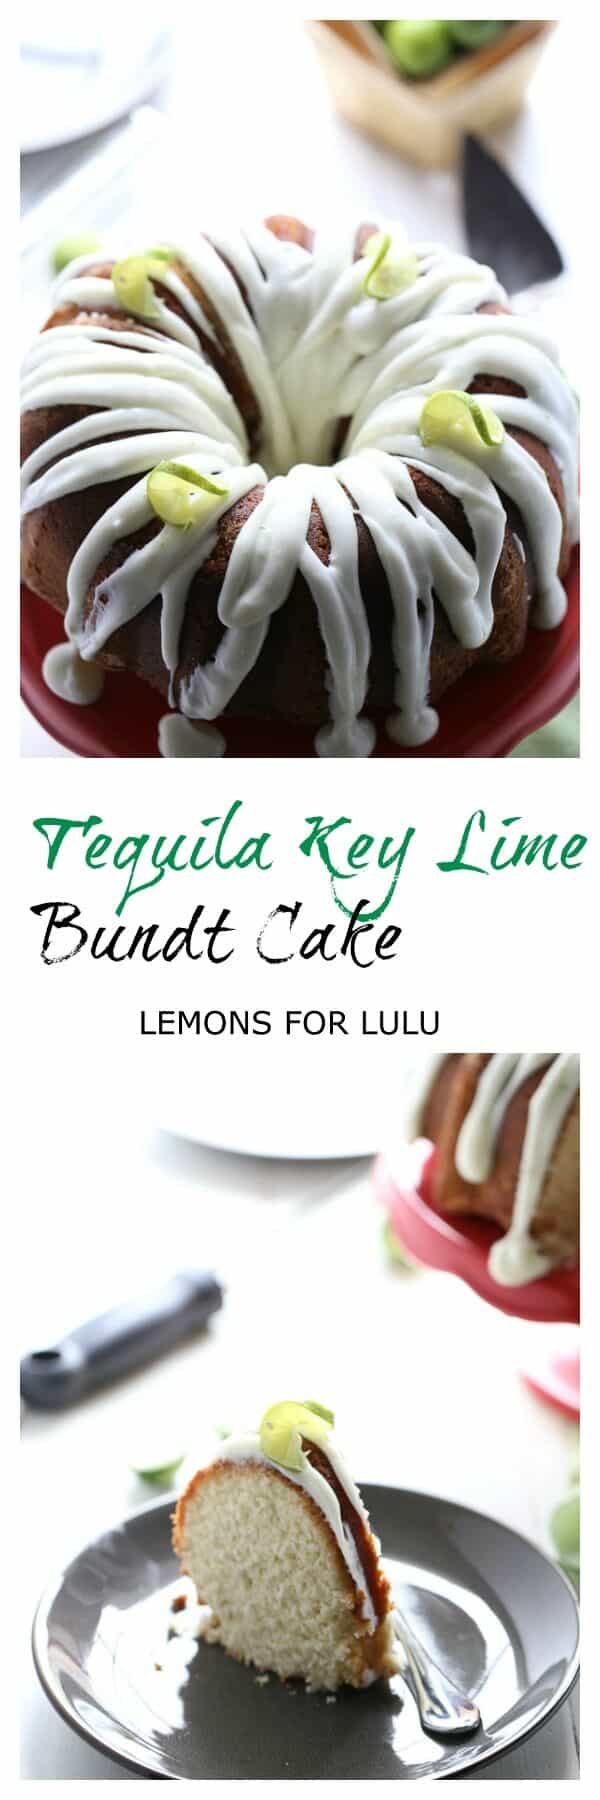 This easy bundt cake recipe is infused with a touch of tequila and filled with the bold, citrusy taste of key limes! lemonsforlulu.com